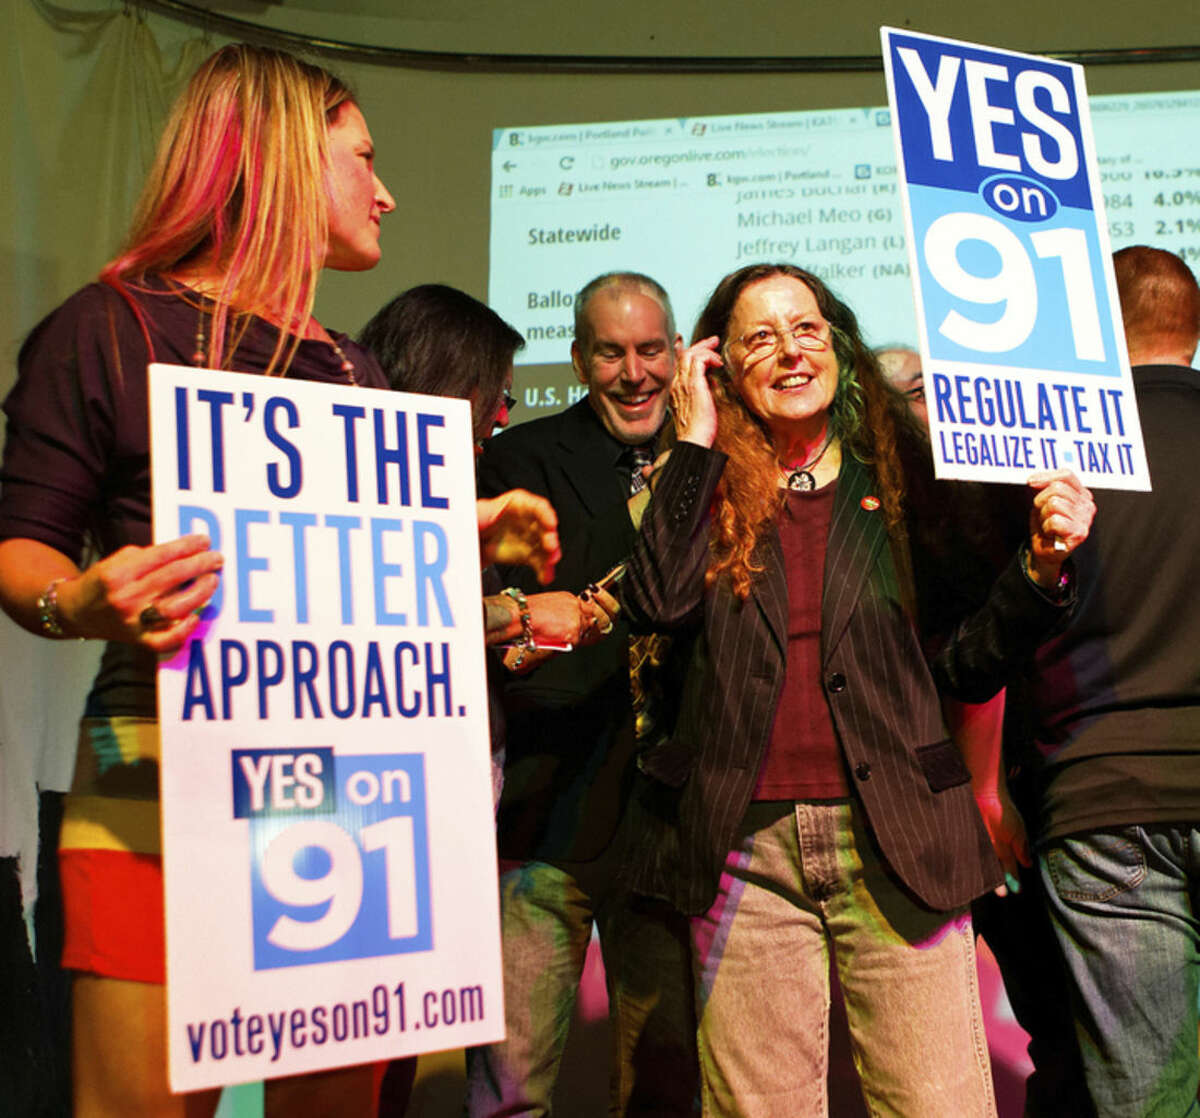 Supporters for the legalization of marijuana celebrate at the Measure 91 party at Holocene night club in Portland, Ore., on Tuesday, Nov. 4, 2014. Oregon voters legalized recreational pot use Tuesday, making the state the third to approve the drug for commercial sales. (AP Photo/The Oregonian, Madeline Stone)